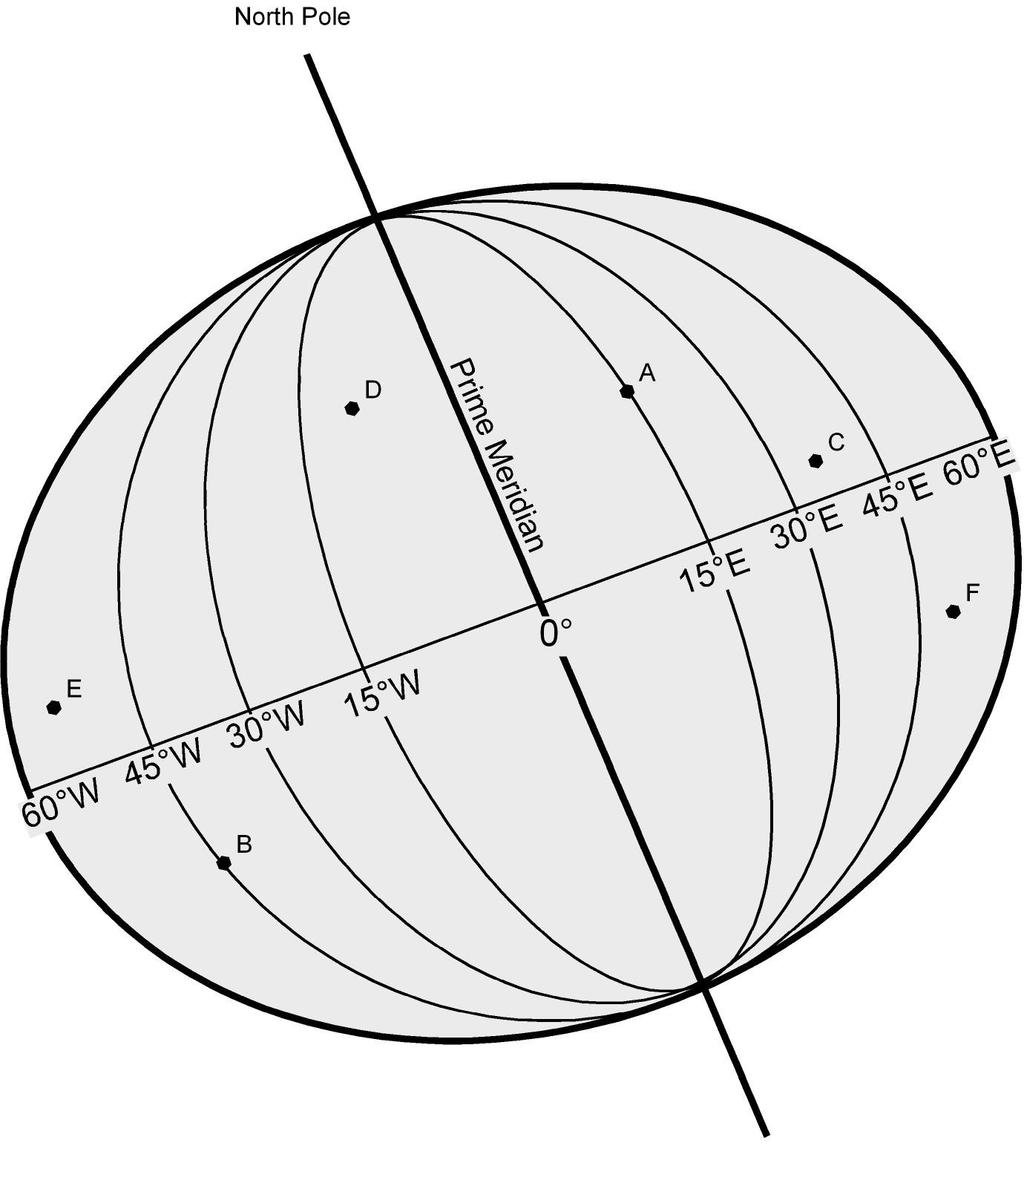 18: Use the diagram below, Figure 6, to determine the longitude for each designated point. Note that if a point does not lie on exactly on a labeled meridian, you must interpolate (estimate).